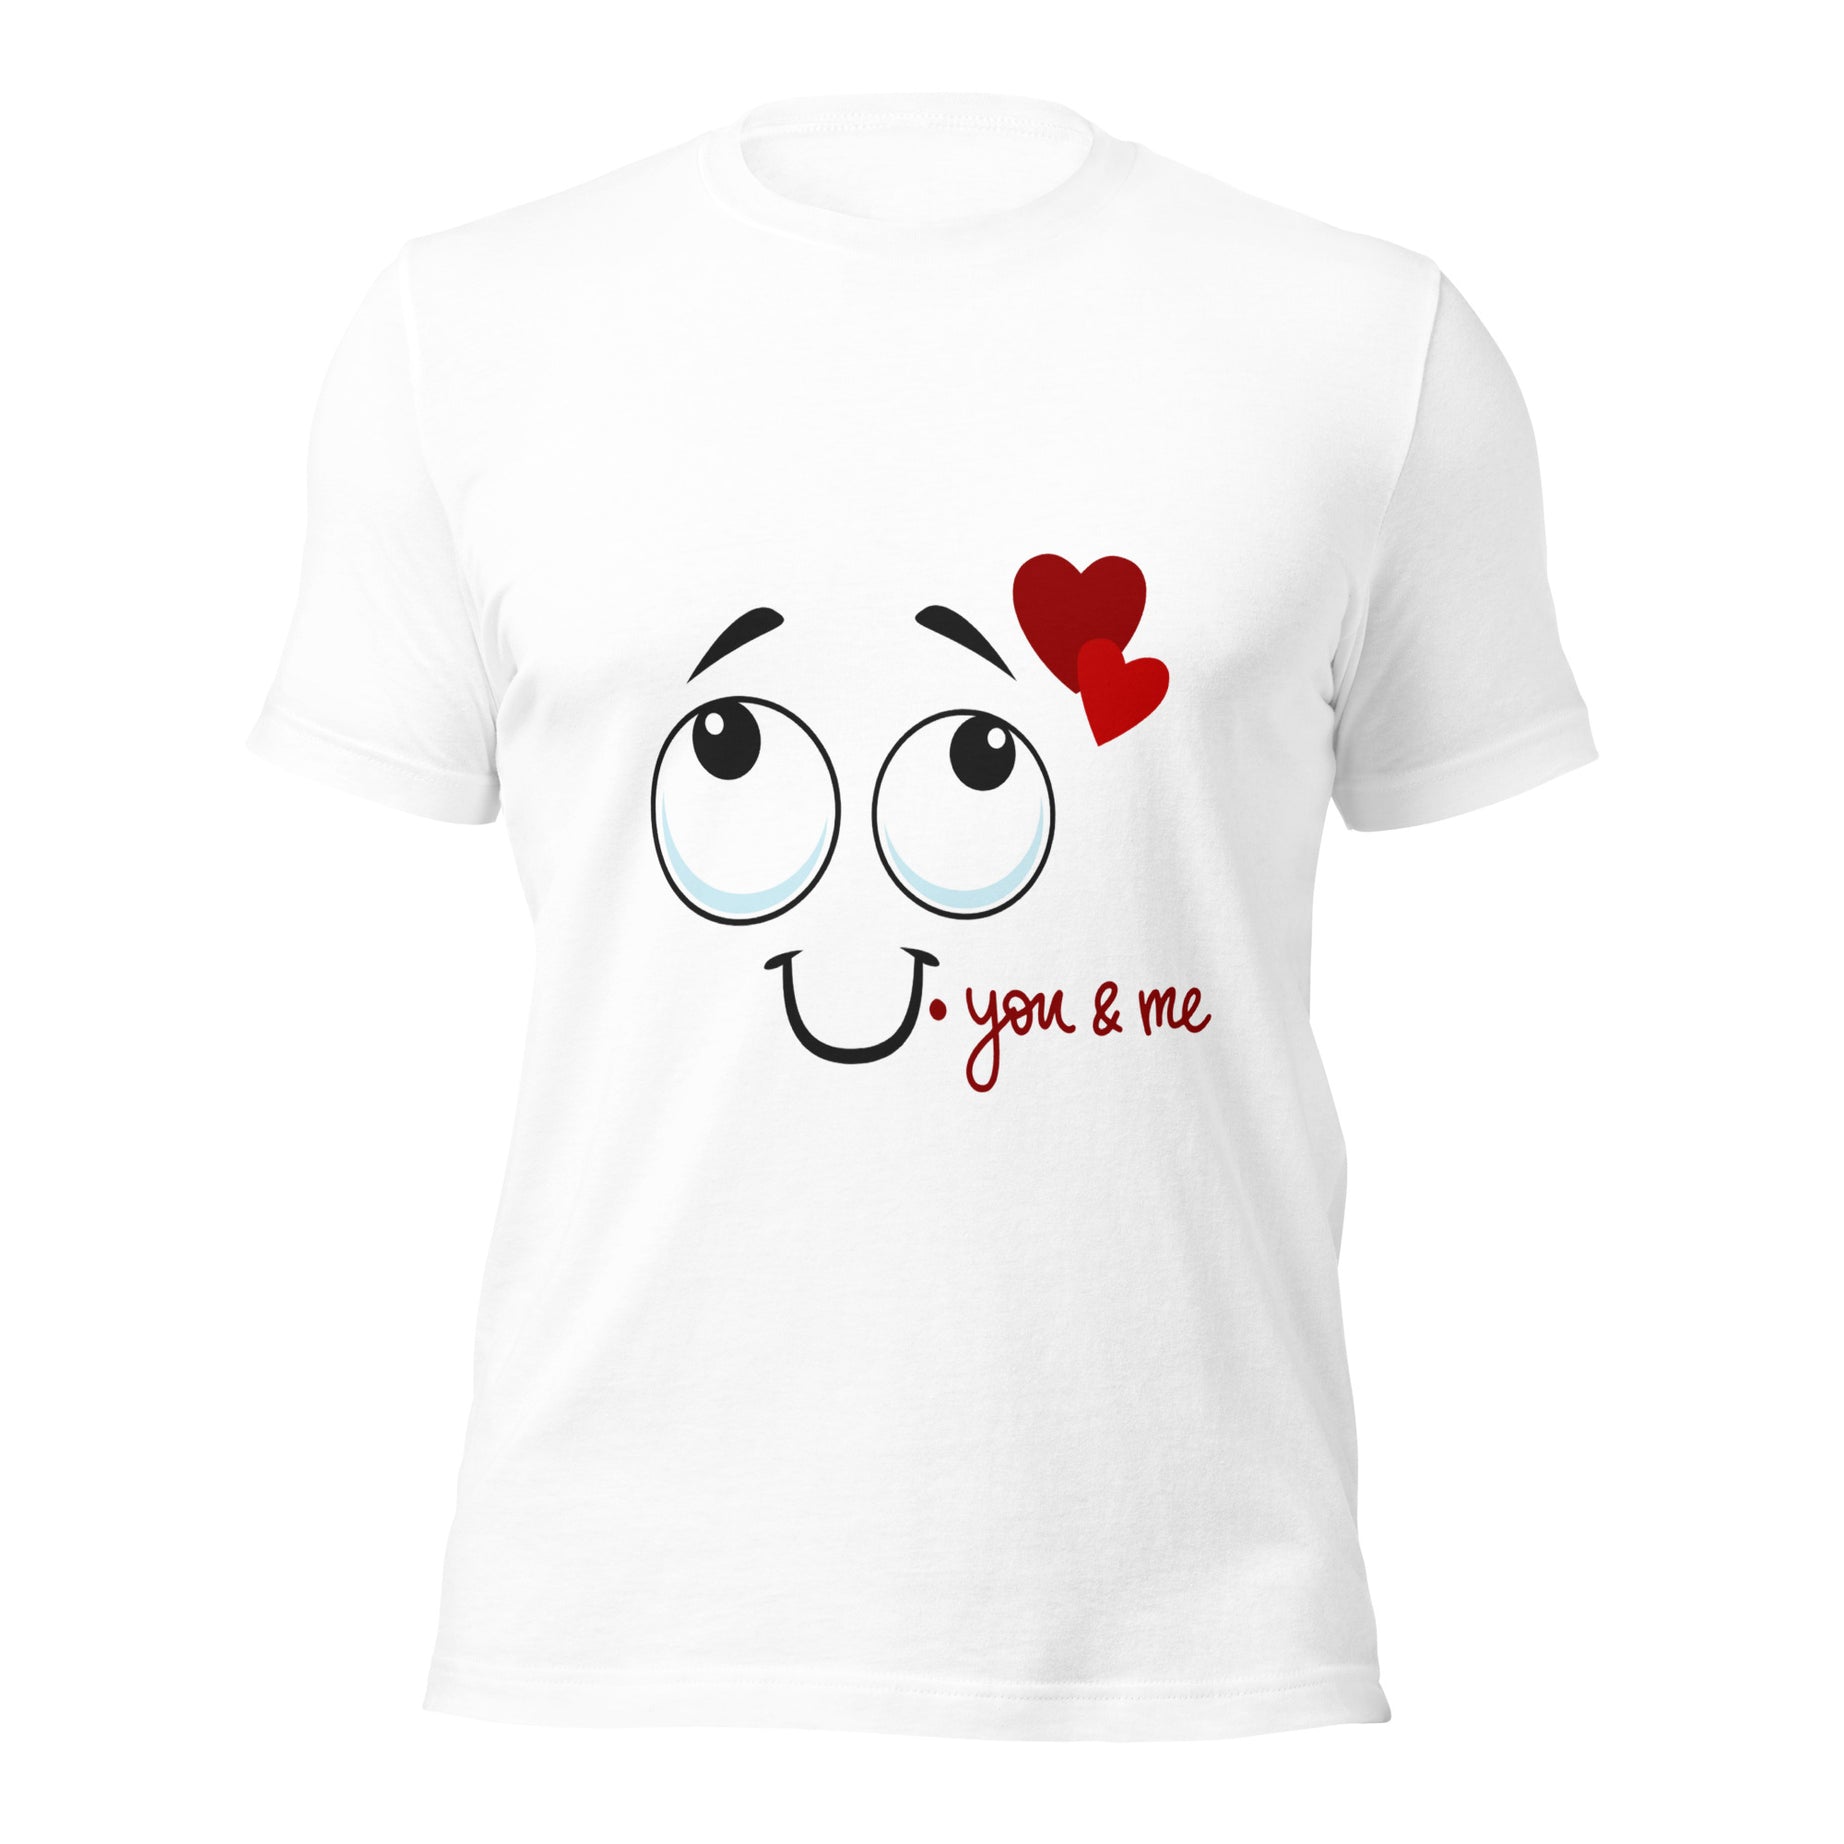 I LOVE YOU T-SHIRT FOR HER